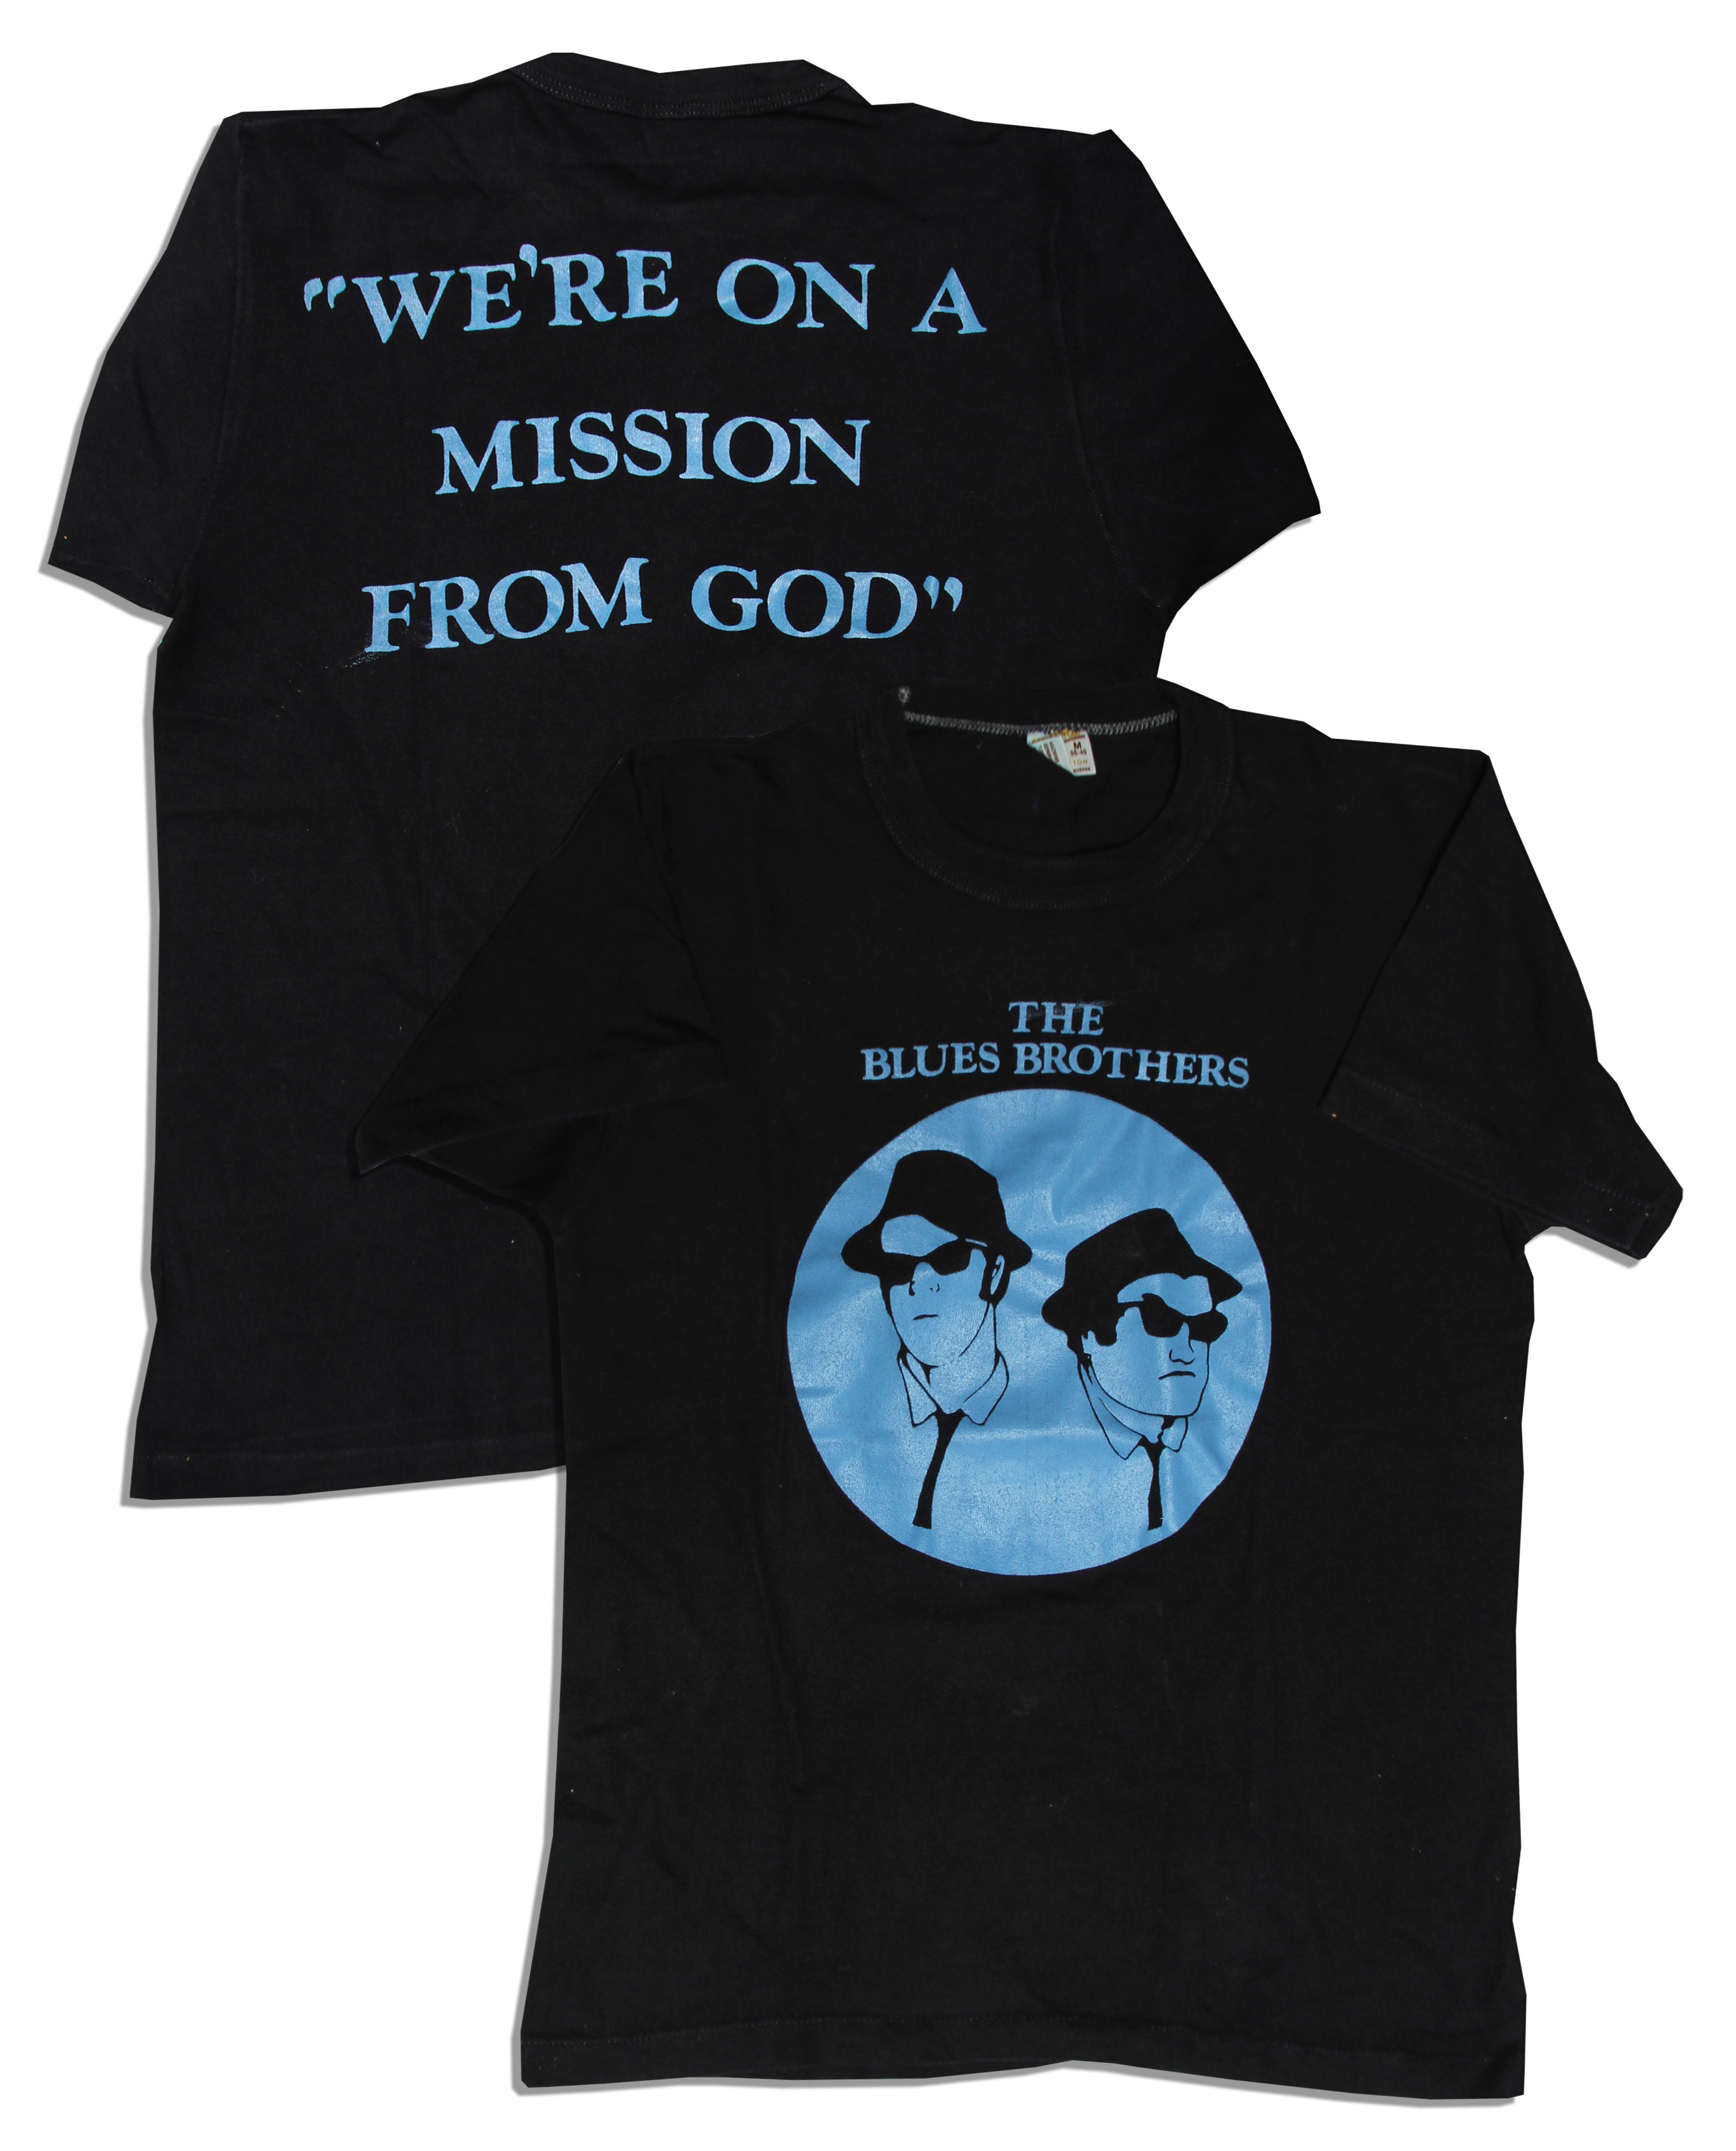 Blues Brothers rayons Musique Rétro Classique Film Movie Music Funny Hommage T Shirt